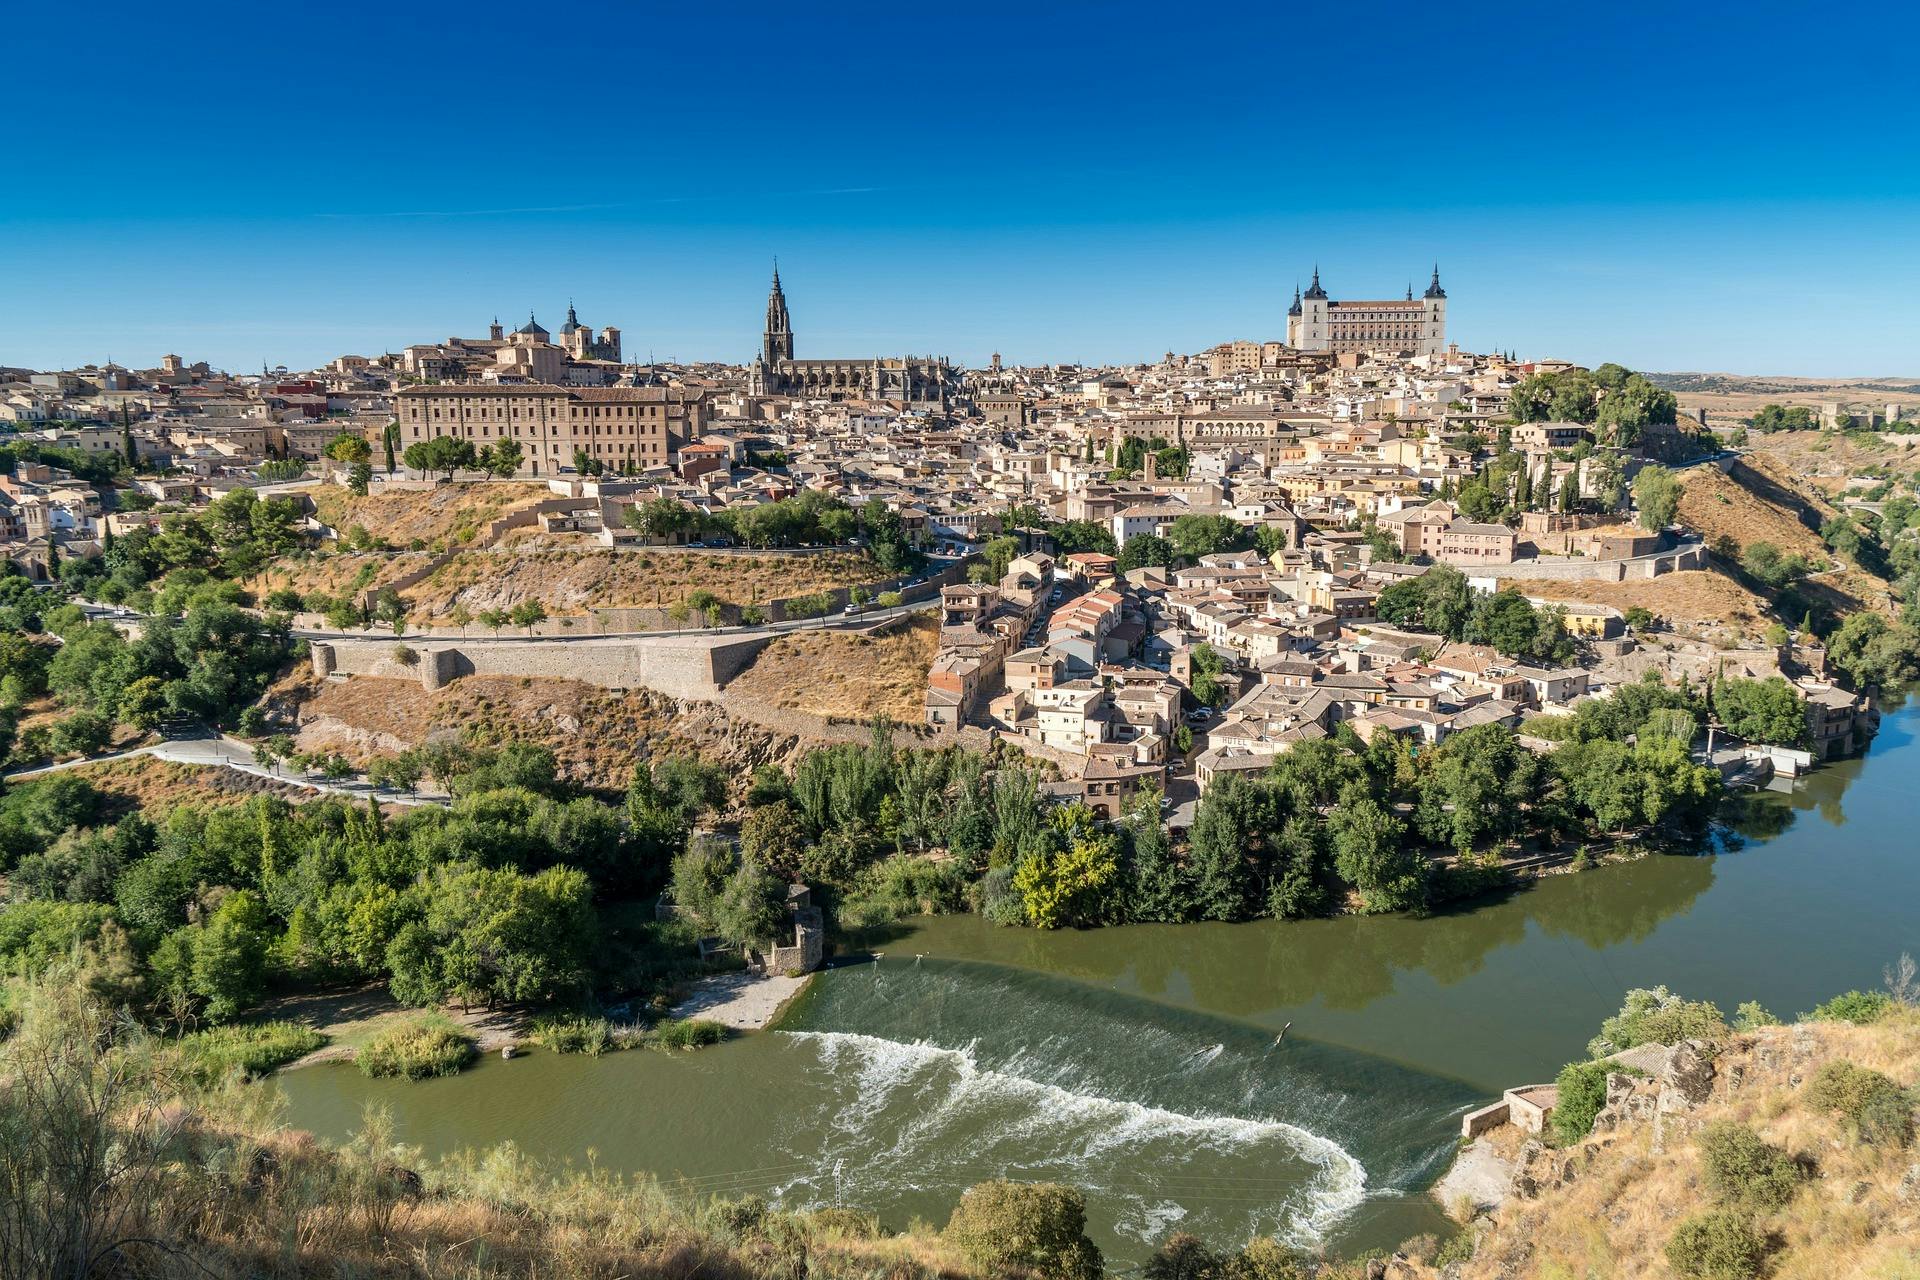 Toledo guided tour from Madrid with panoramic views1.jpg